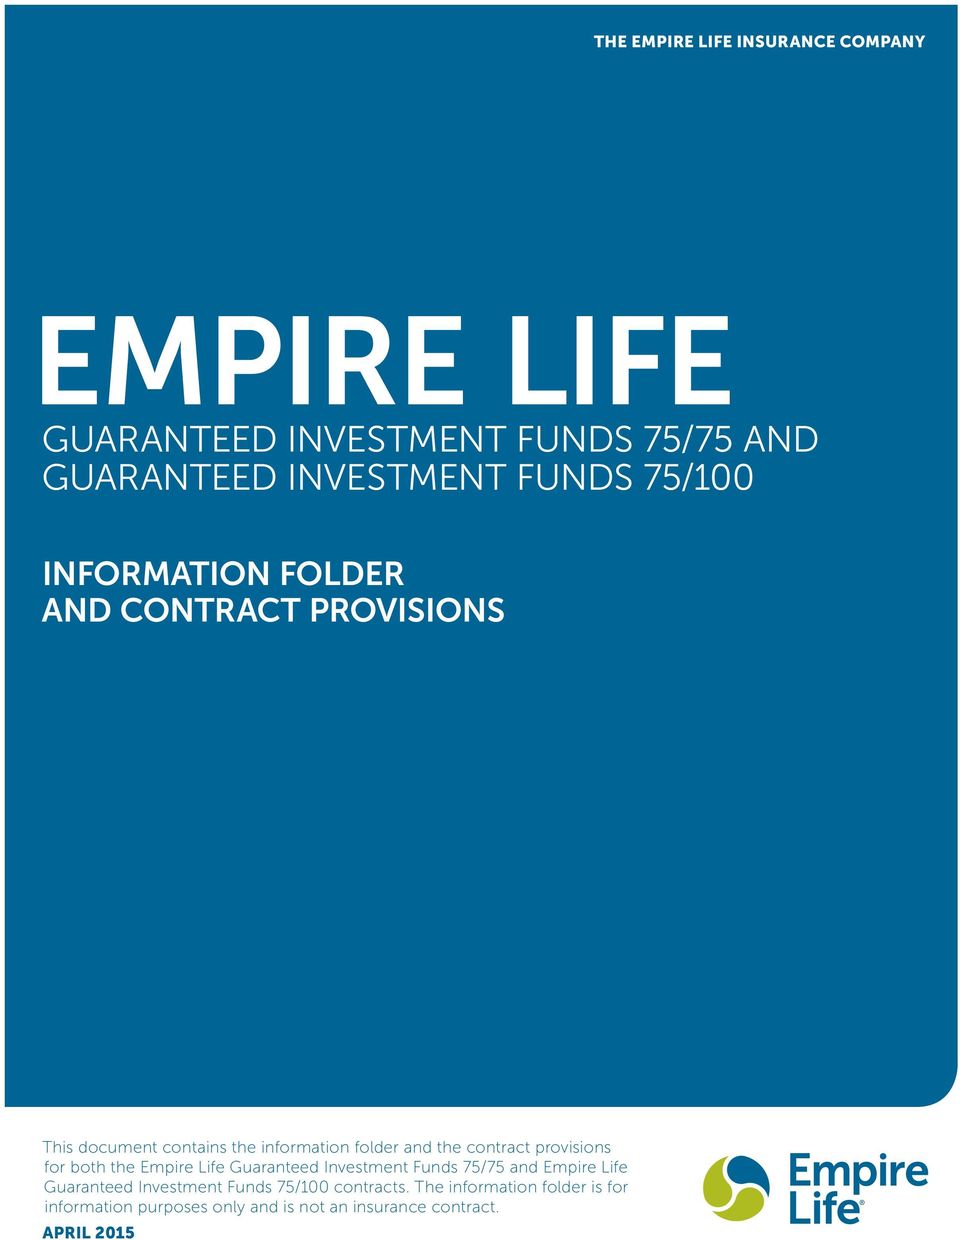 provisions for both the Empire Life Guaranteed Investment Funds 75/75 and Empire Life Guaranteed Investment Funds